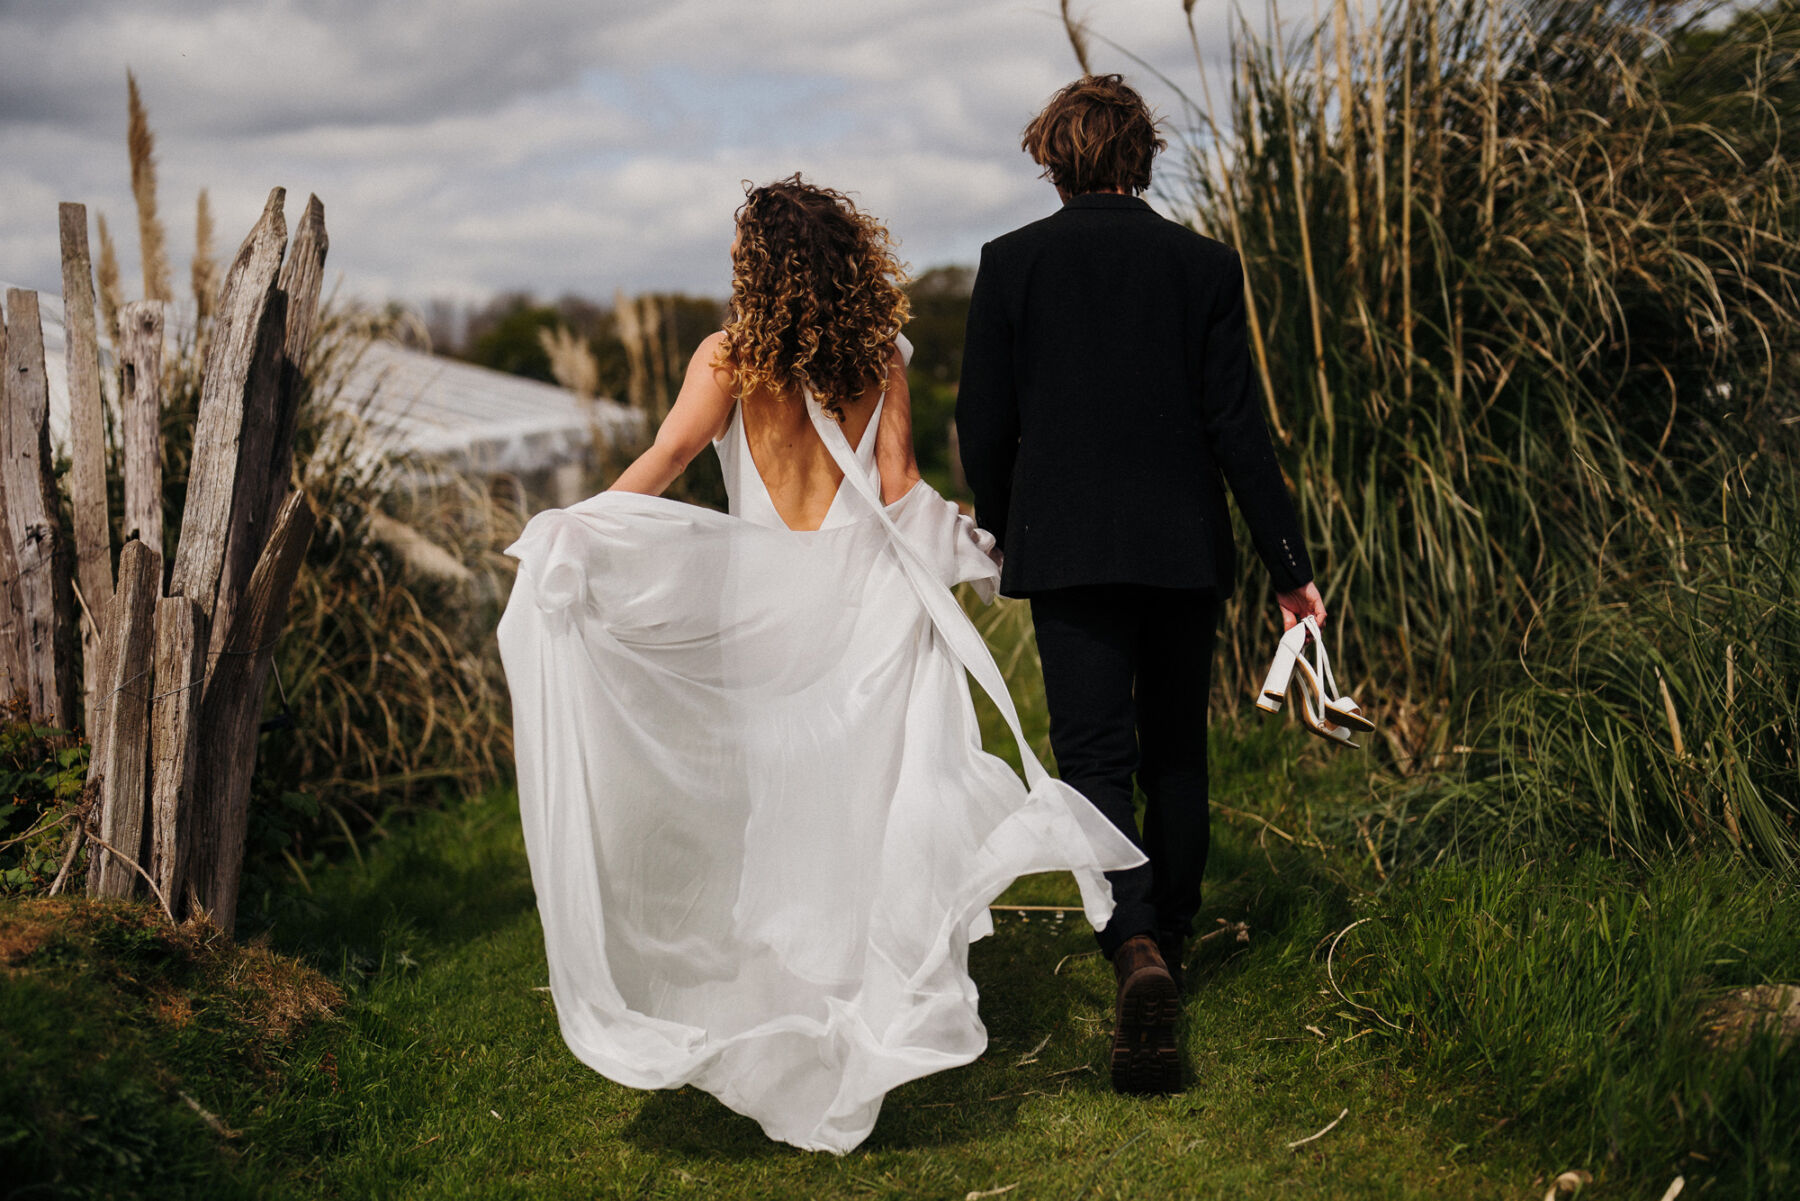 Bohemian bride wiht her dress wafting behind her as she walks through grasses at Wonderland Sussex. Voyteck Photography.